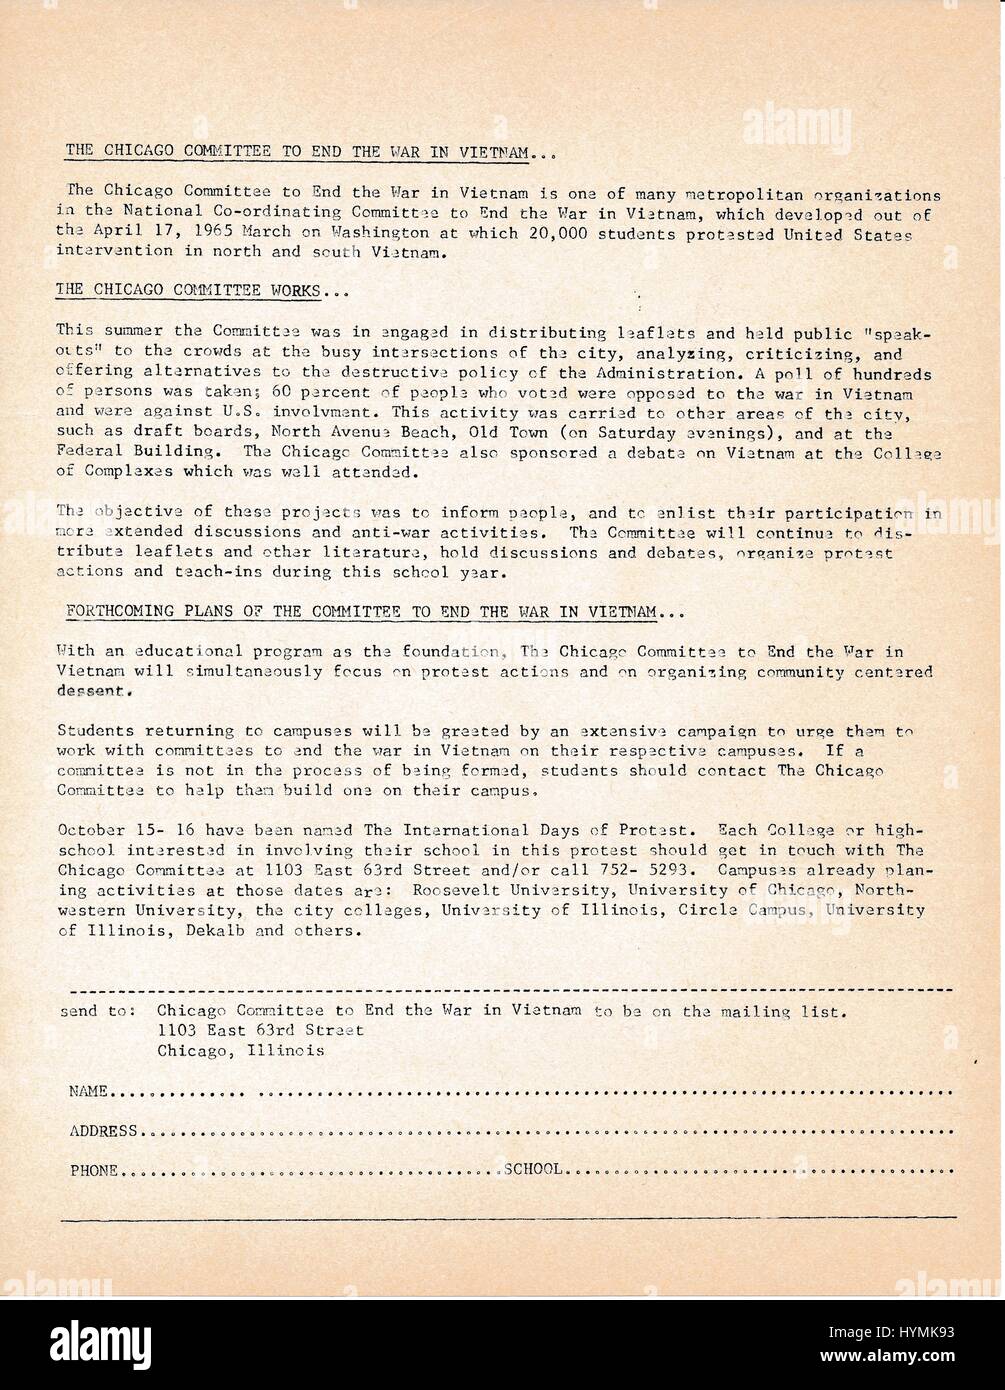 A Vietnam War era leaflet from The Chicago Committee to End the War in Vietnam advocating the involvement of citizens and students in their movement and featuring a tear off mailer to request information, Chicago, IL, 1967. Stock Photo